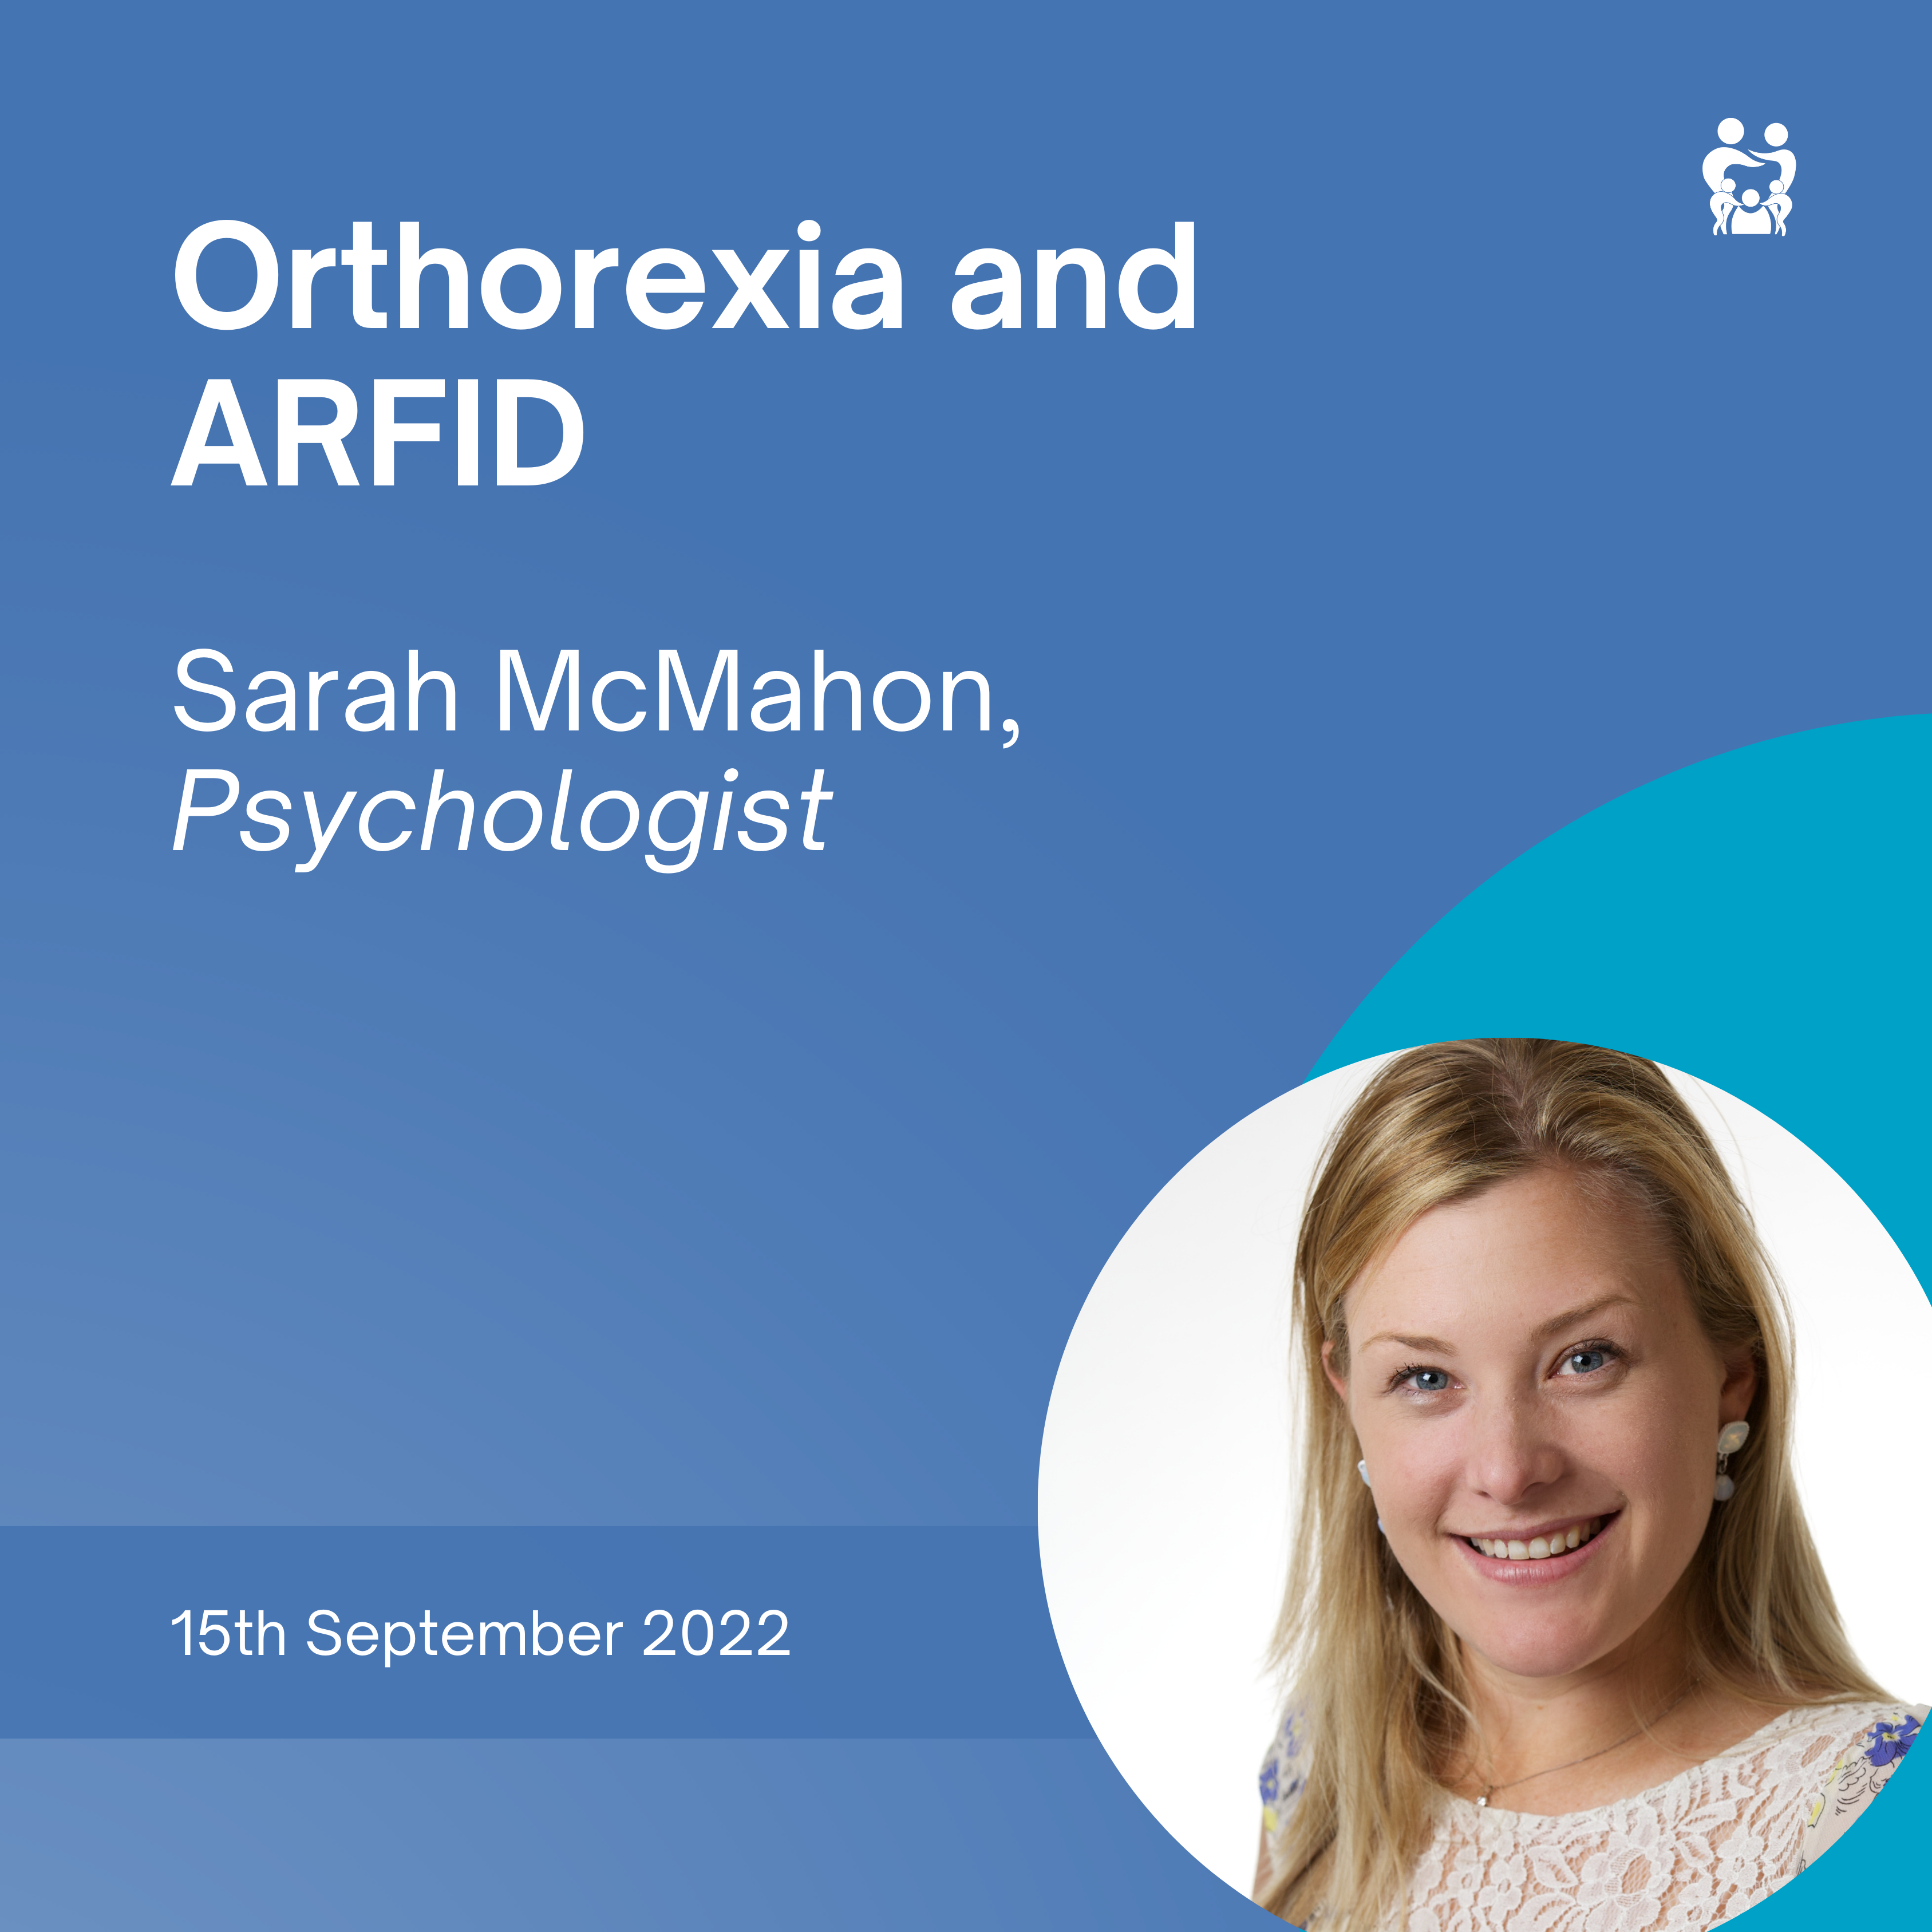 Orthorexia and ARFID with Sarah McMahon, Psychologist 15 September 2022